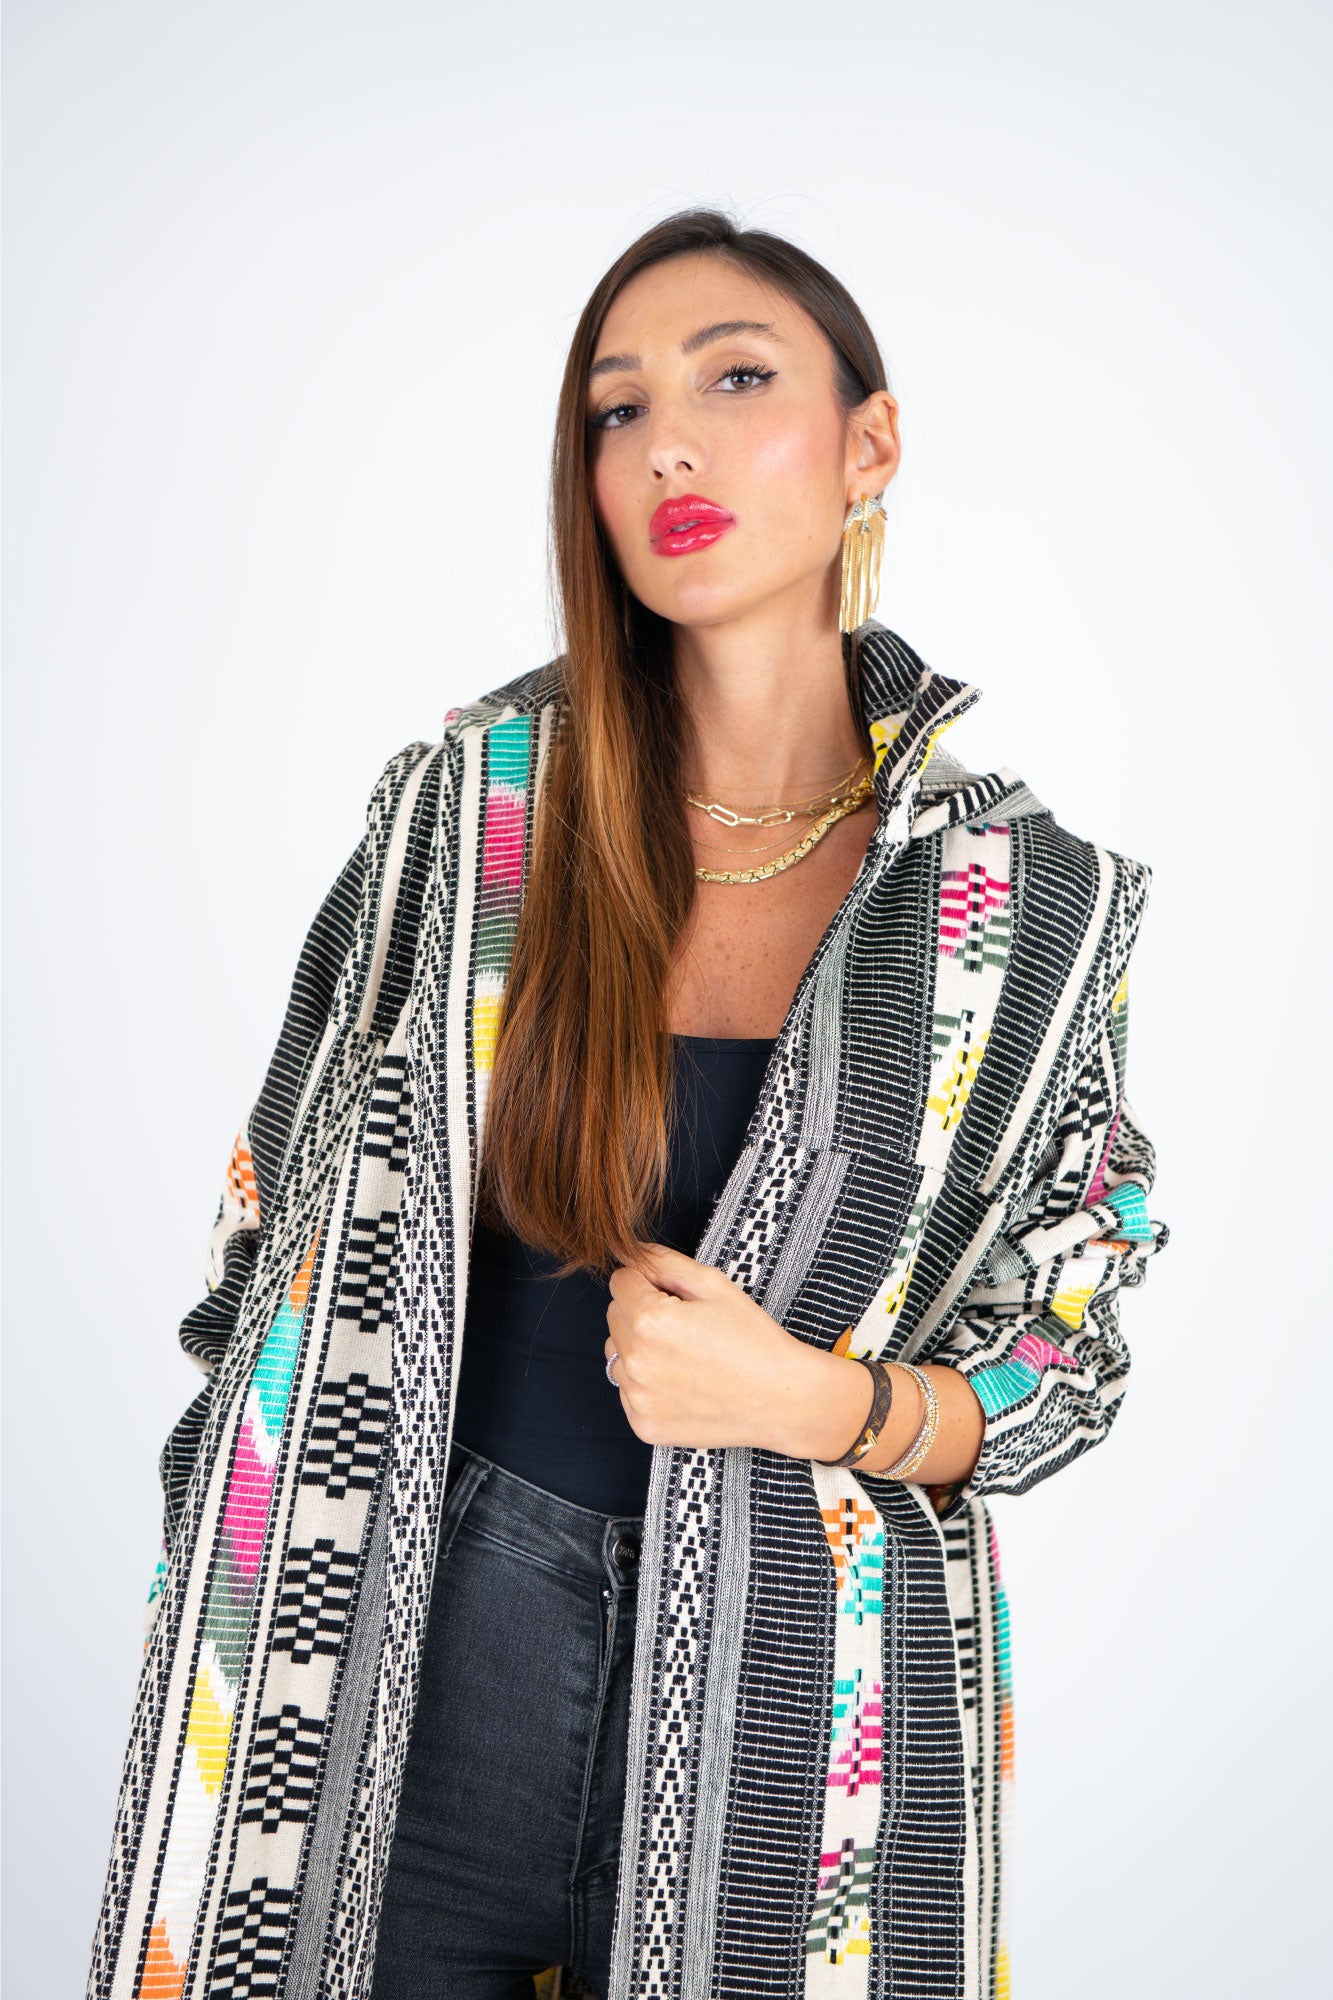 Colorful Winter Abaya with Bold Geometric Patterns for a Vibrant Look